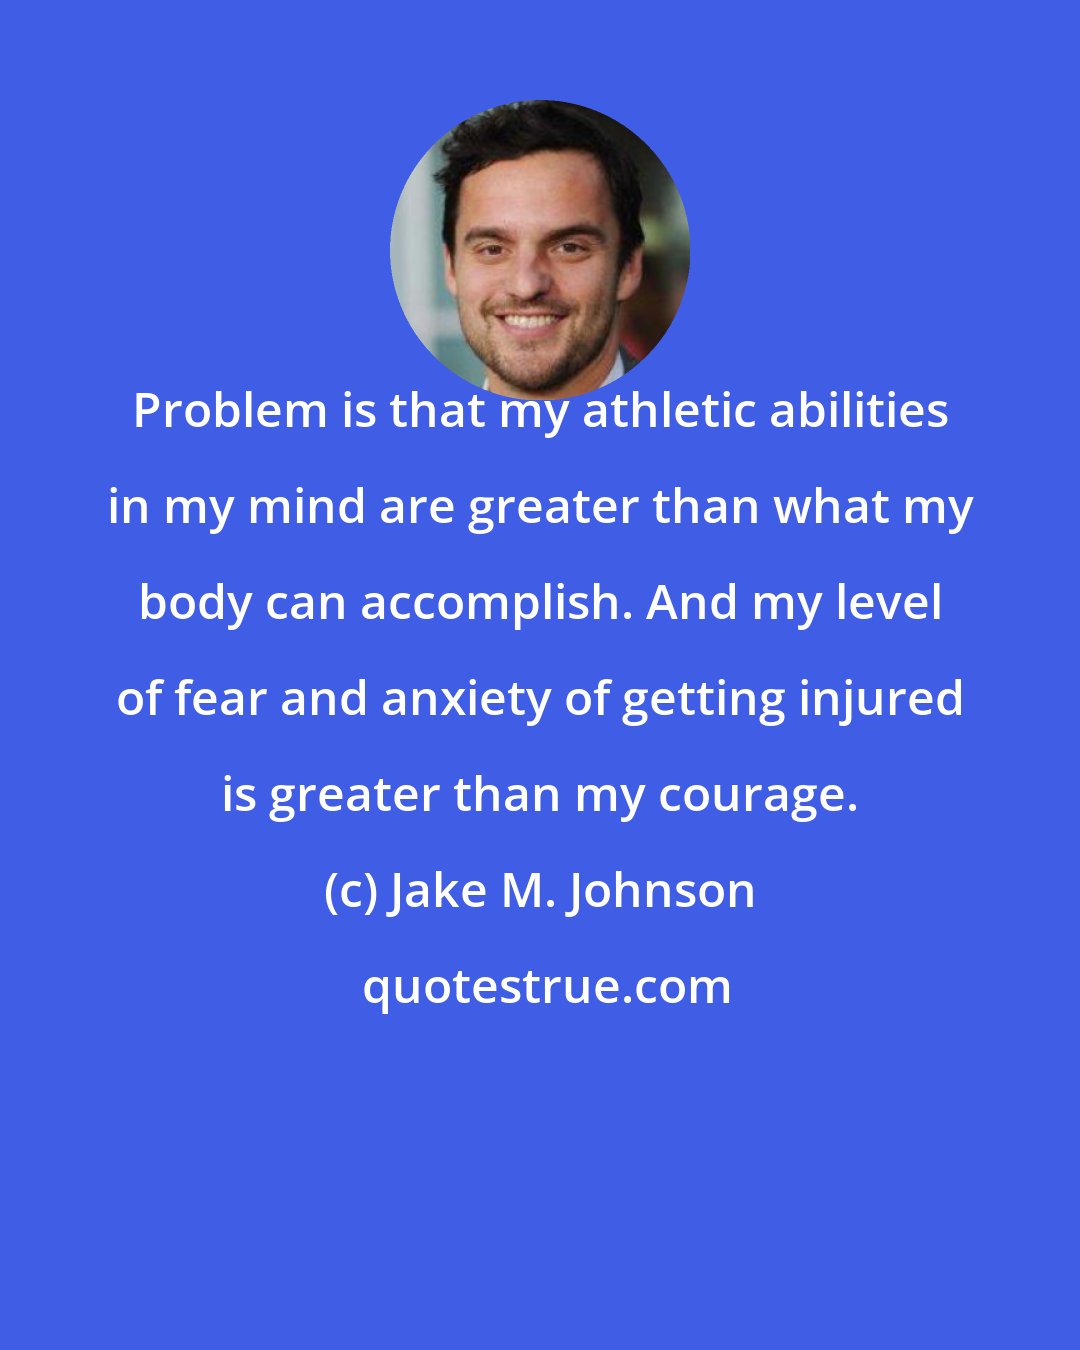 Jake M. Johnson: Problem is that my athletic abilities in my mind are greater than what my body can accomplish. And my level of fear and anxiety of getting injured is greater than my courage.